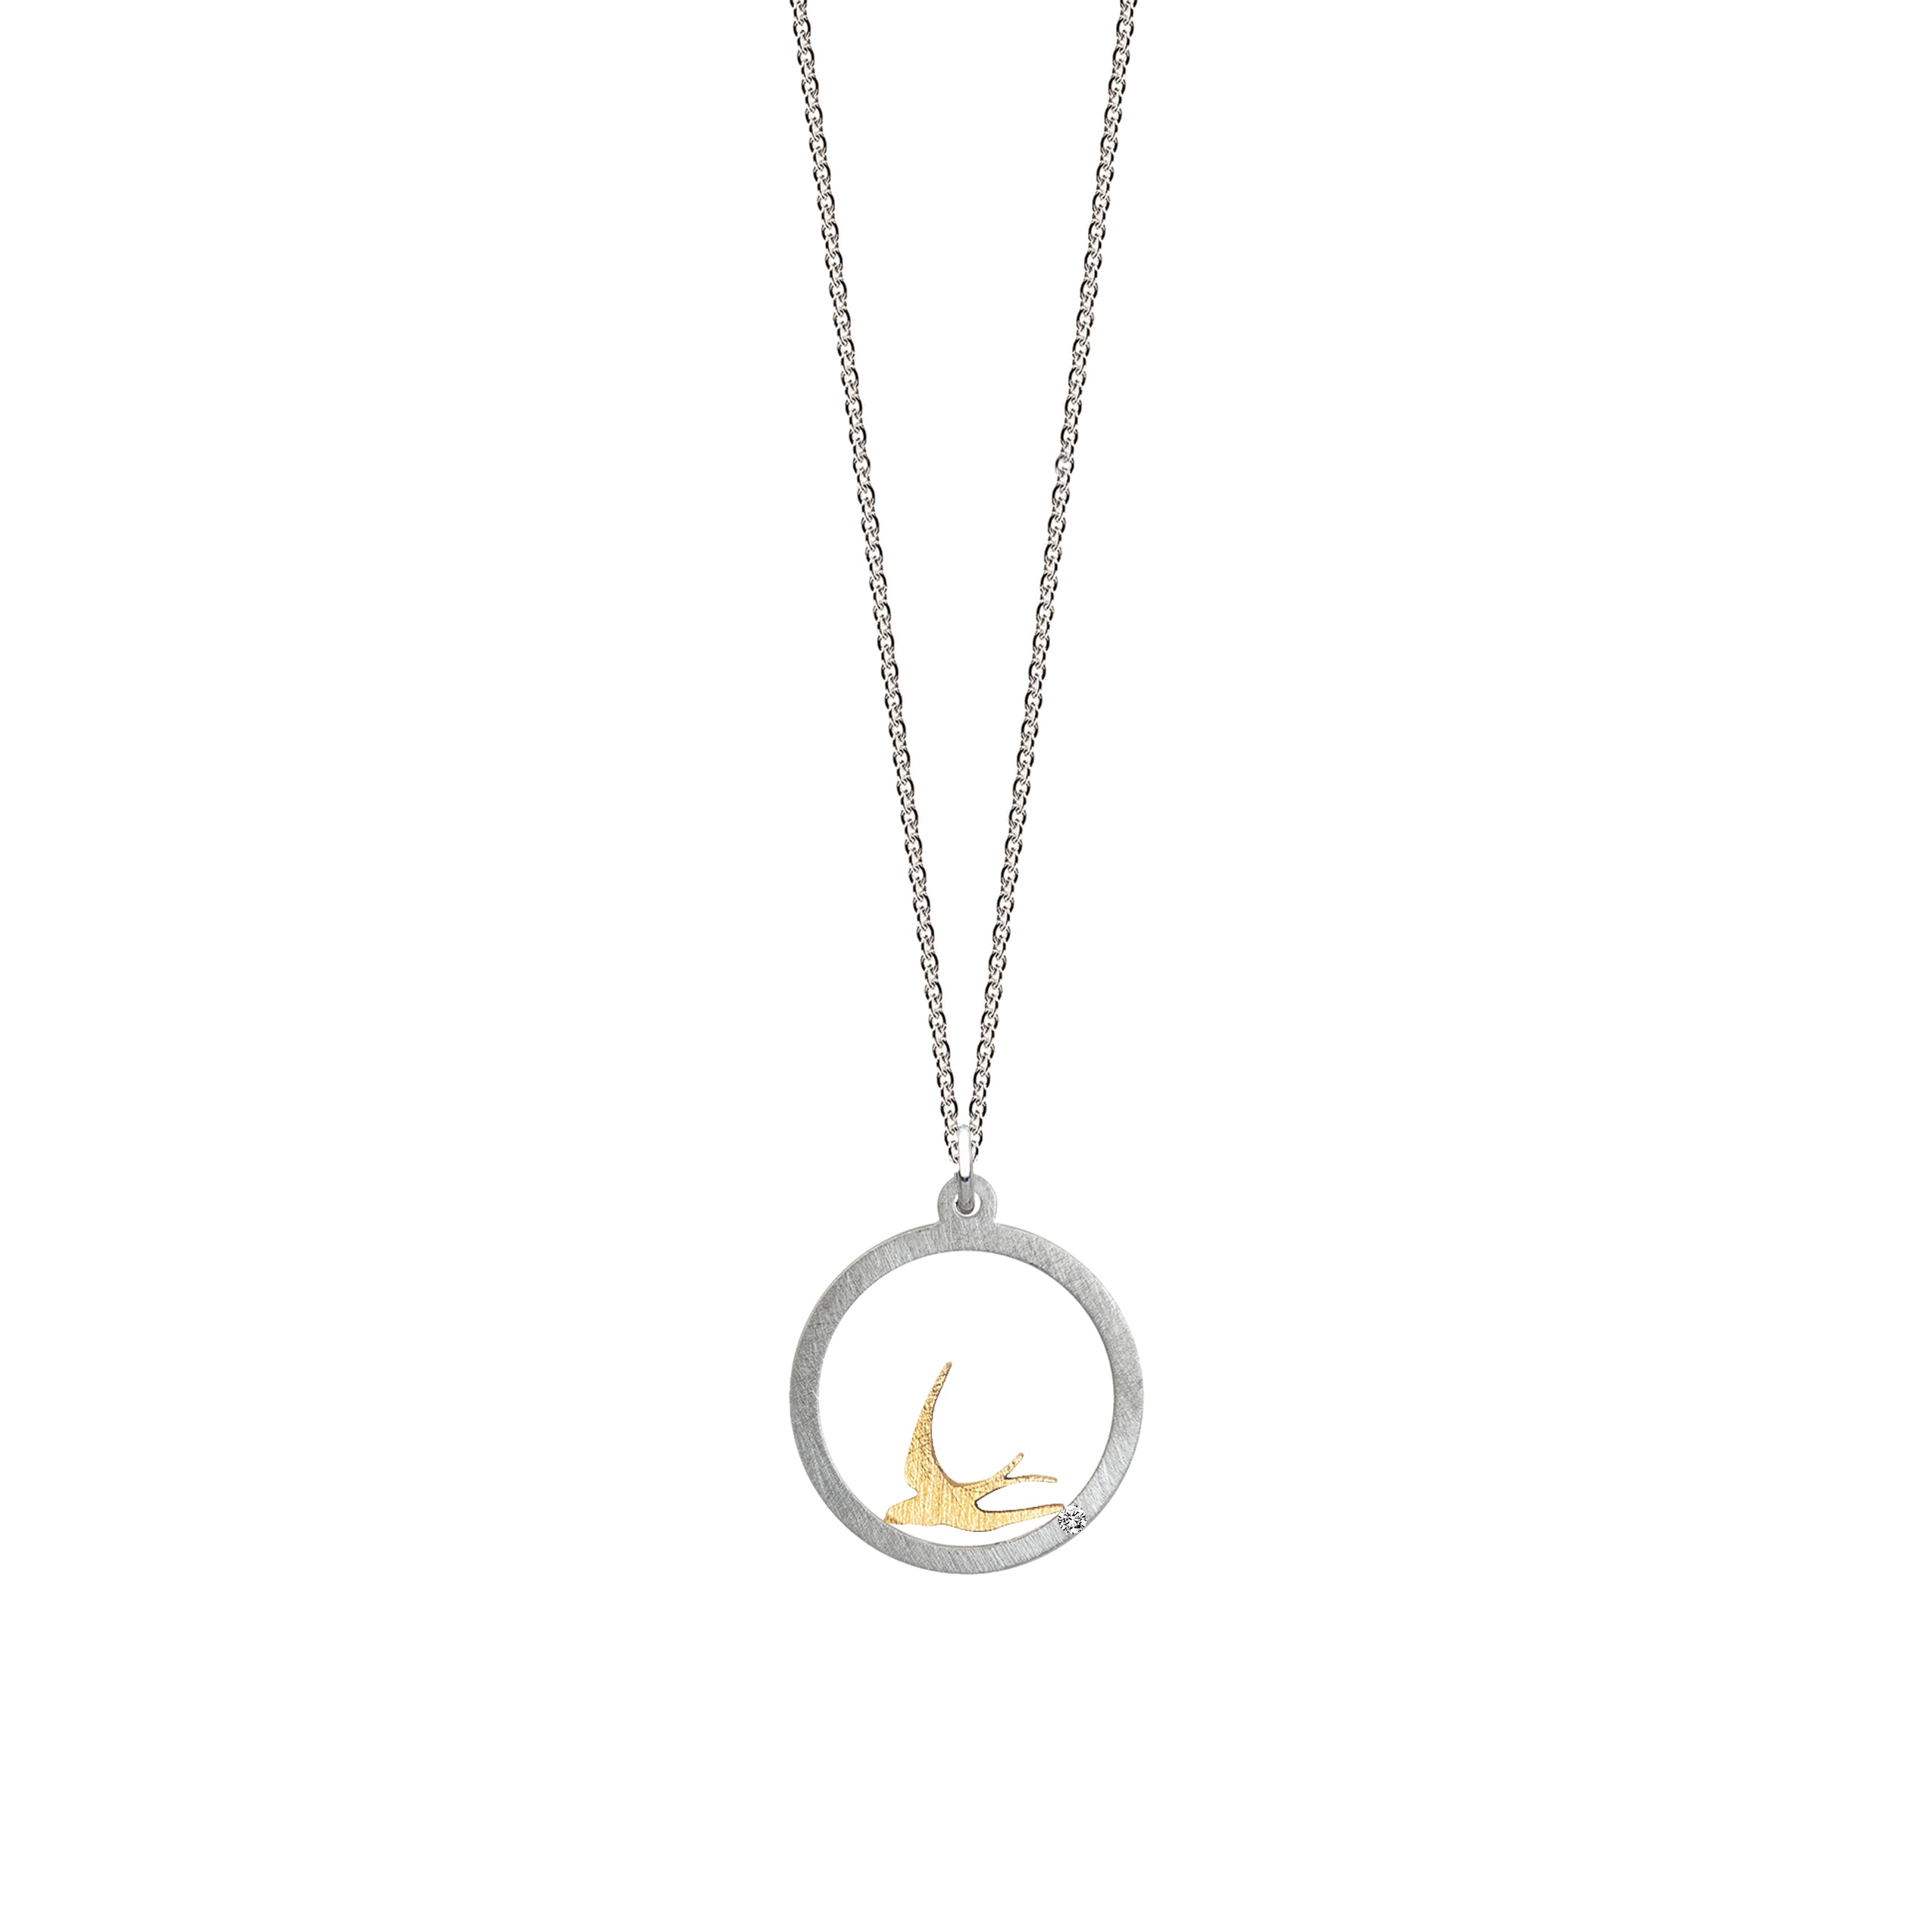 Intention pendant "FREEDOM" with brilliant 0.007ct TWVS